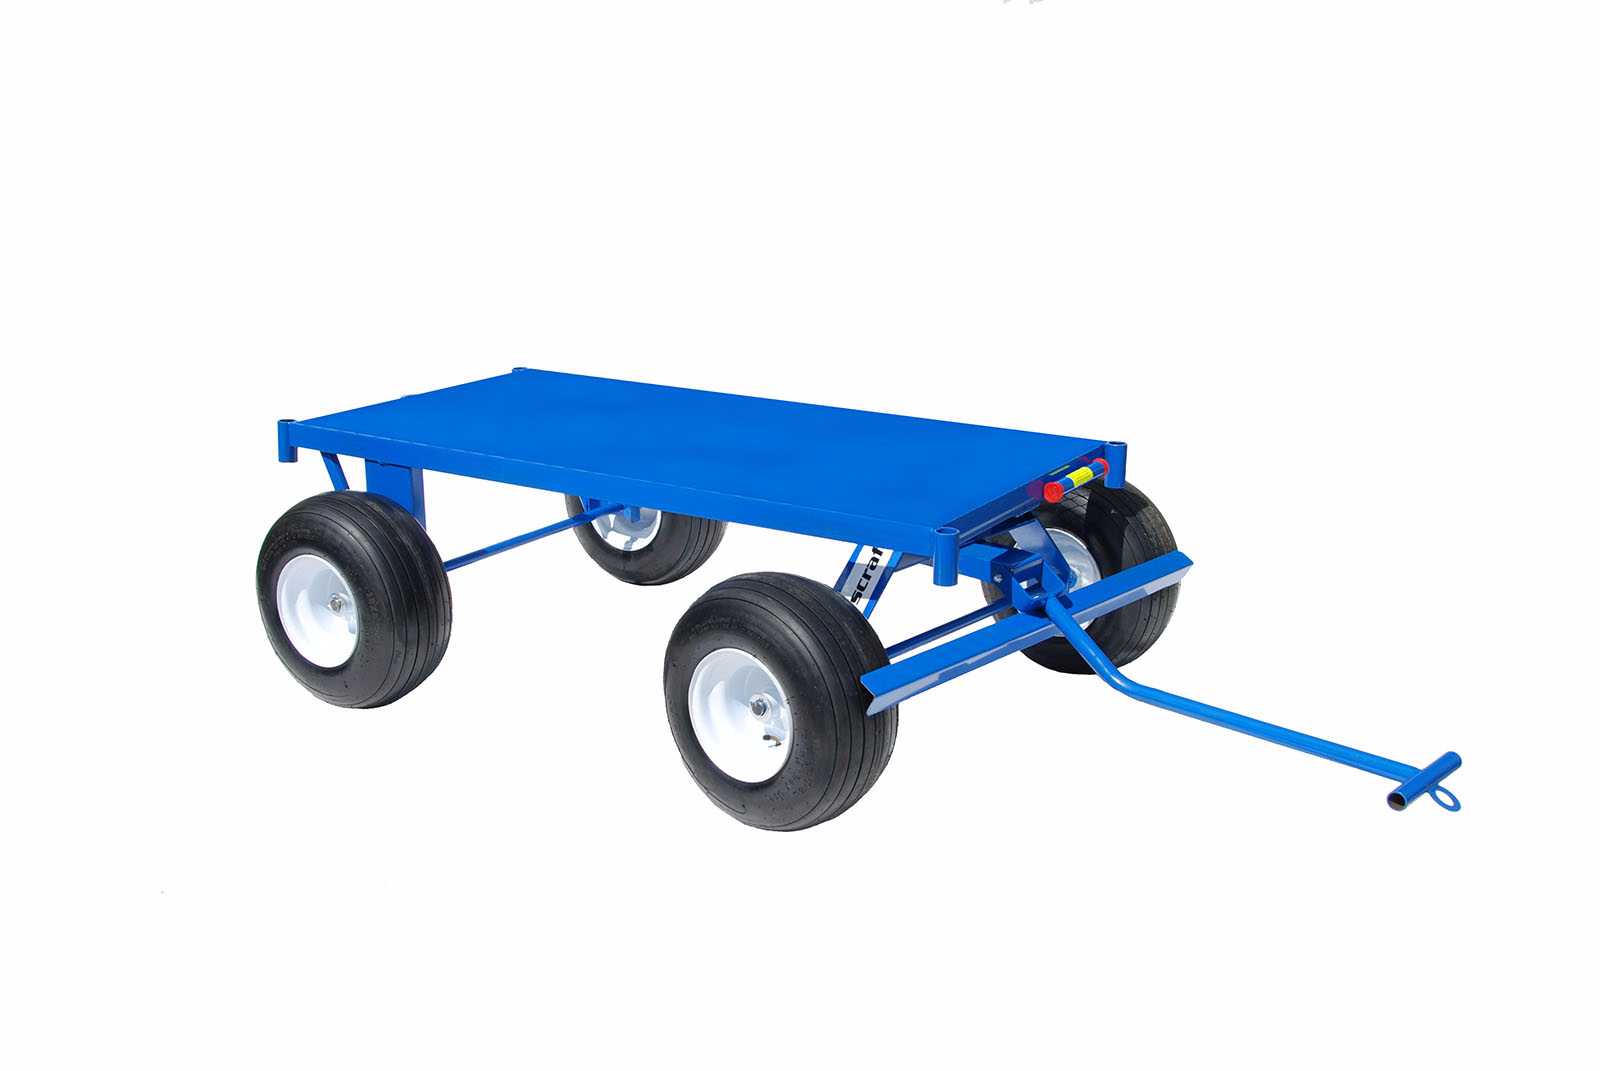 4-Wheel Heavy Duty 30 x 60 in. Material Trailer Cart, from Roofmaster